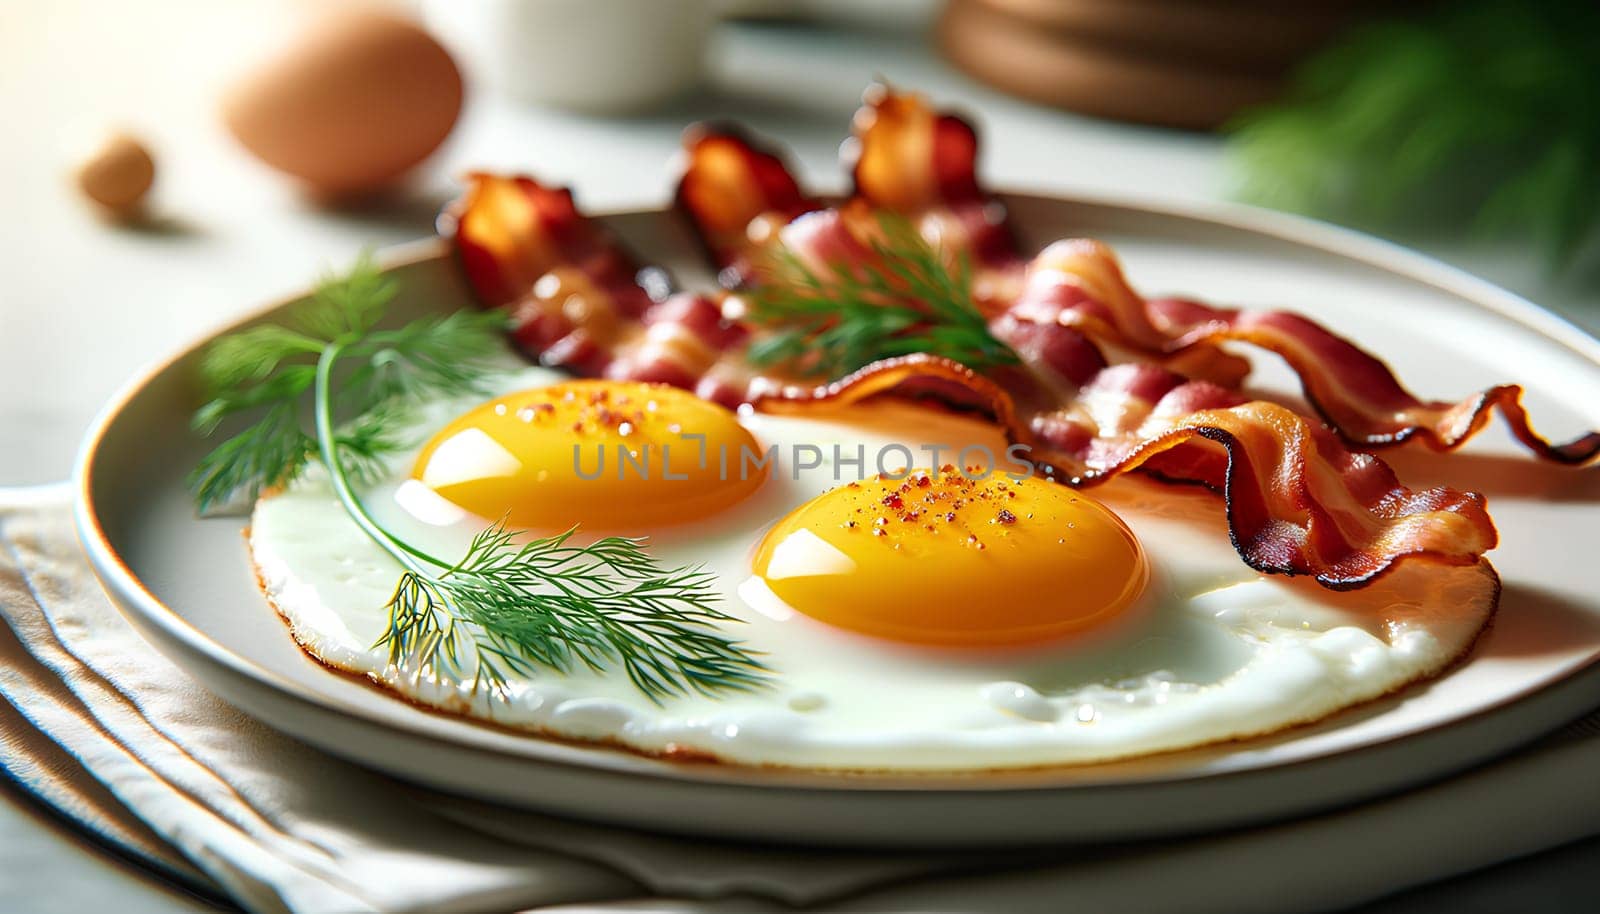 Scrambled eggs and bacon on a white plate close-up.